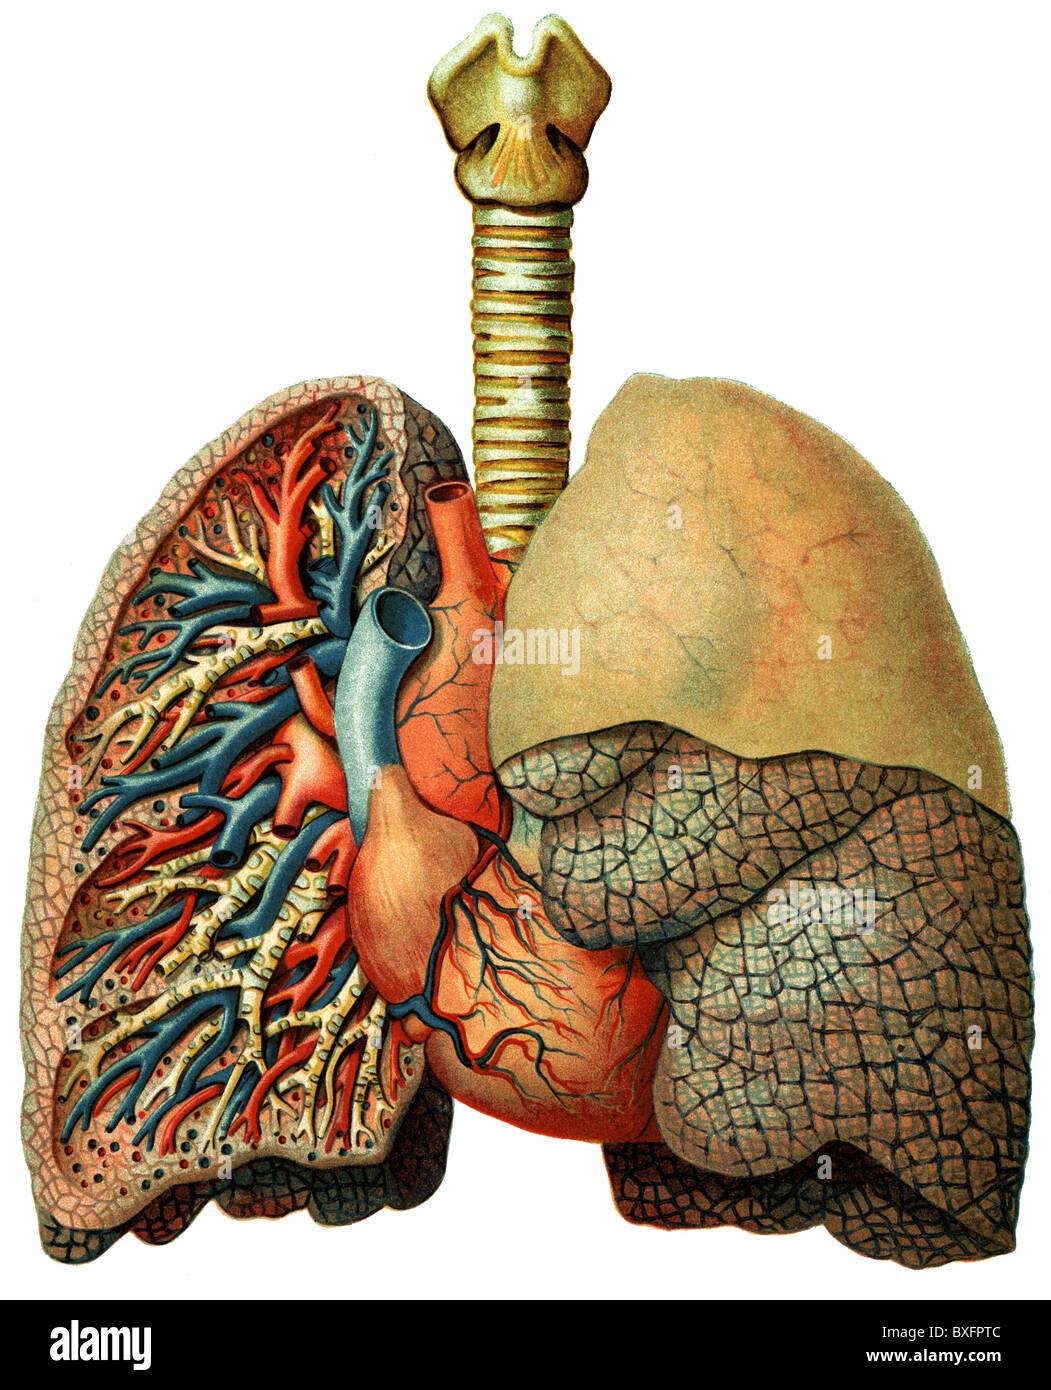 medicine, anatomy, organ, lung, medical illustration, Germany, 1903, Additional-Rights-Clearences-Not Available Stock Photo